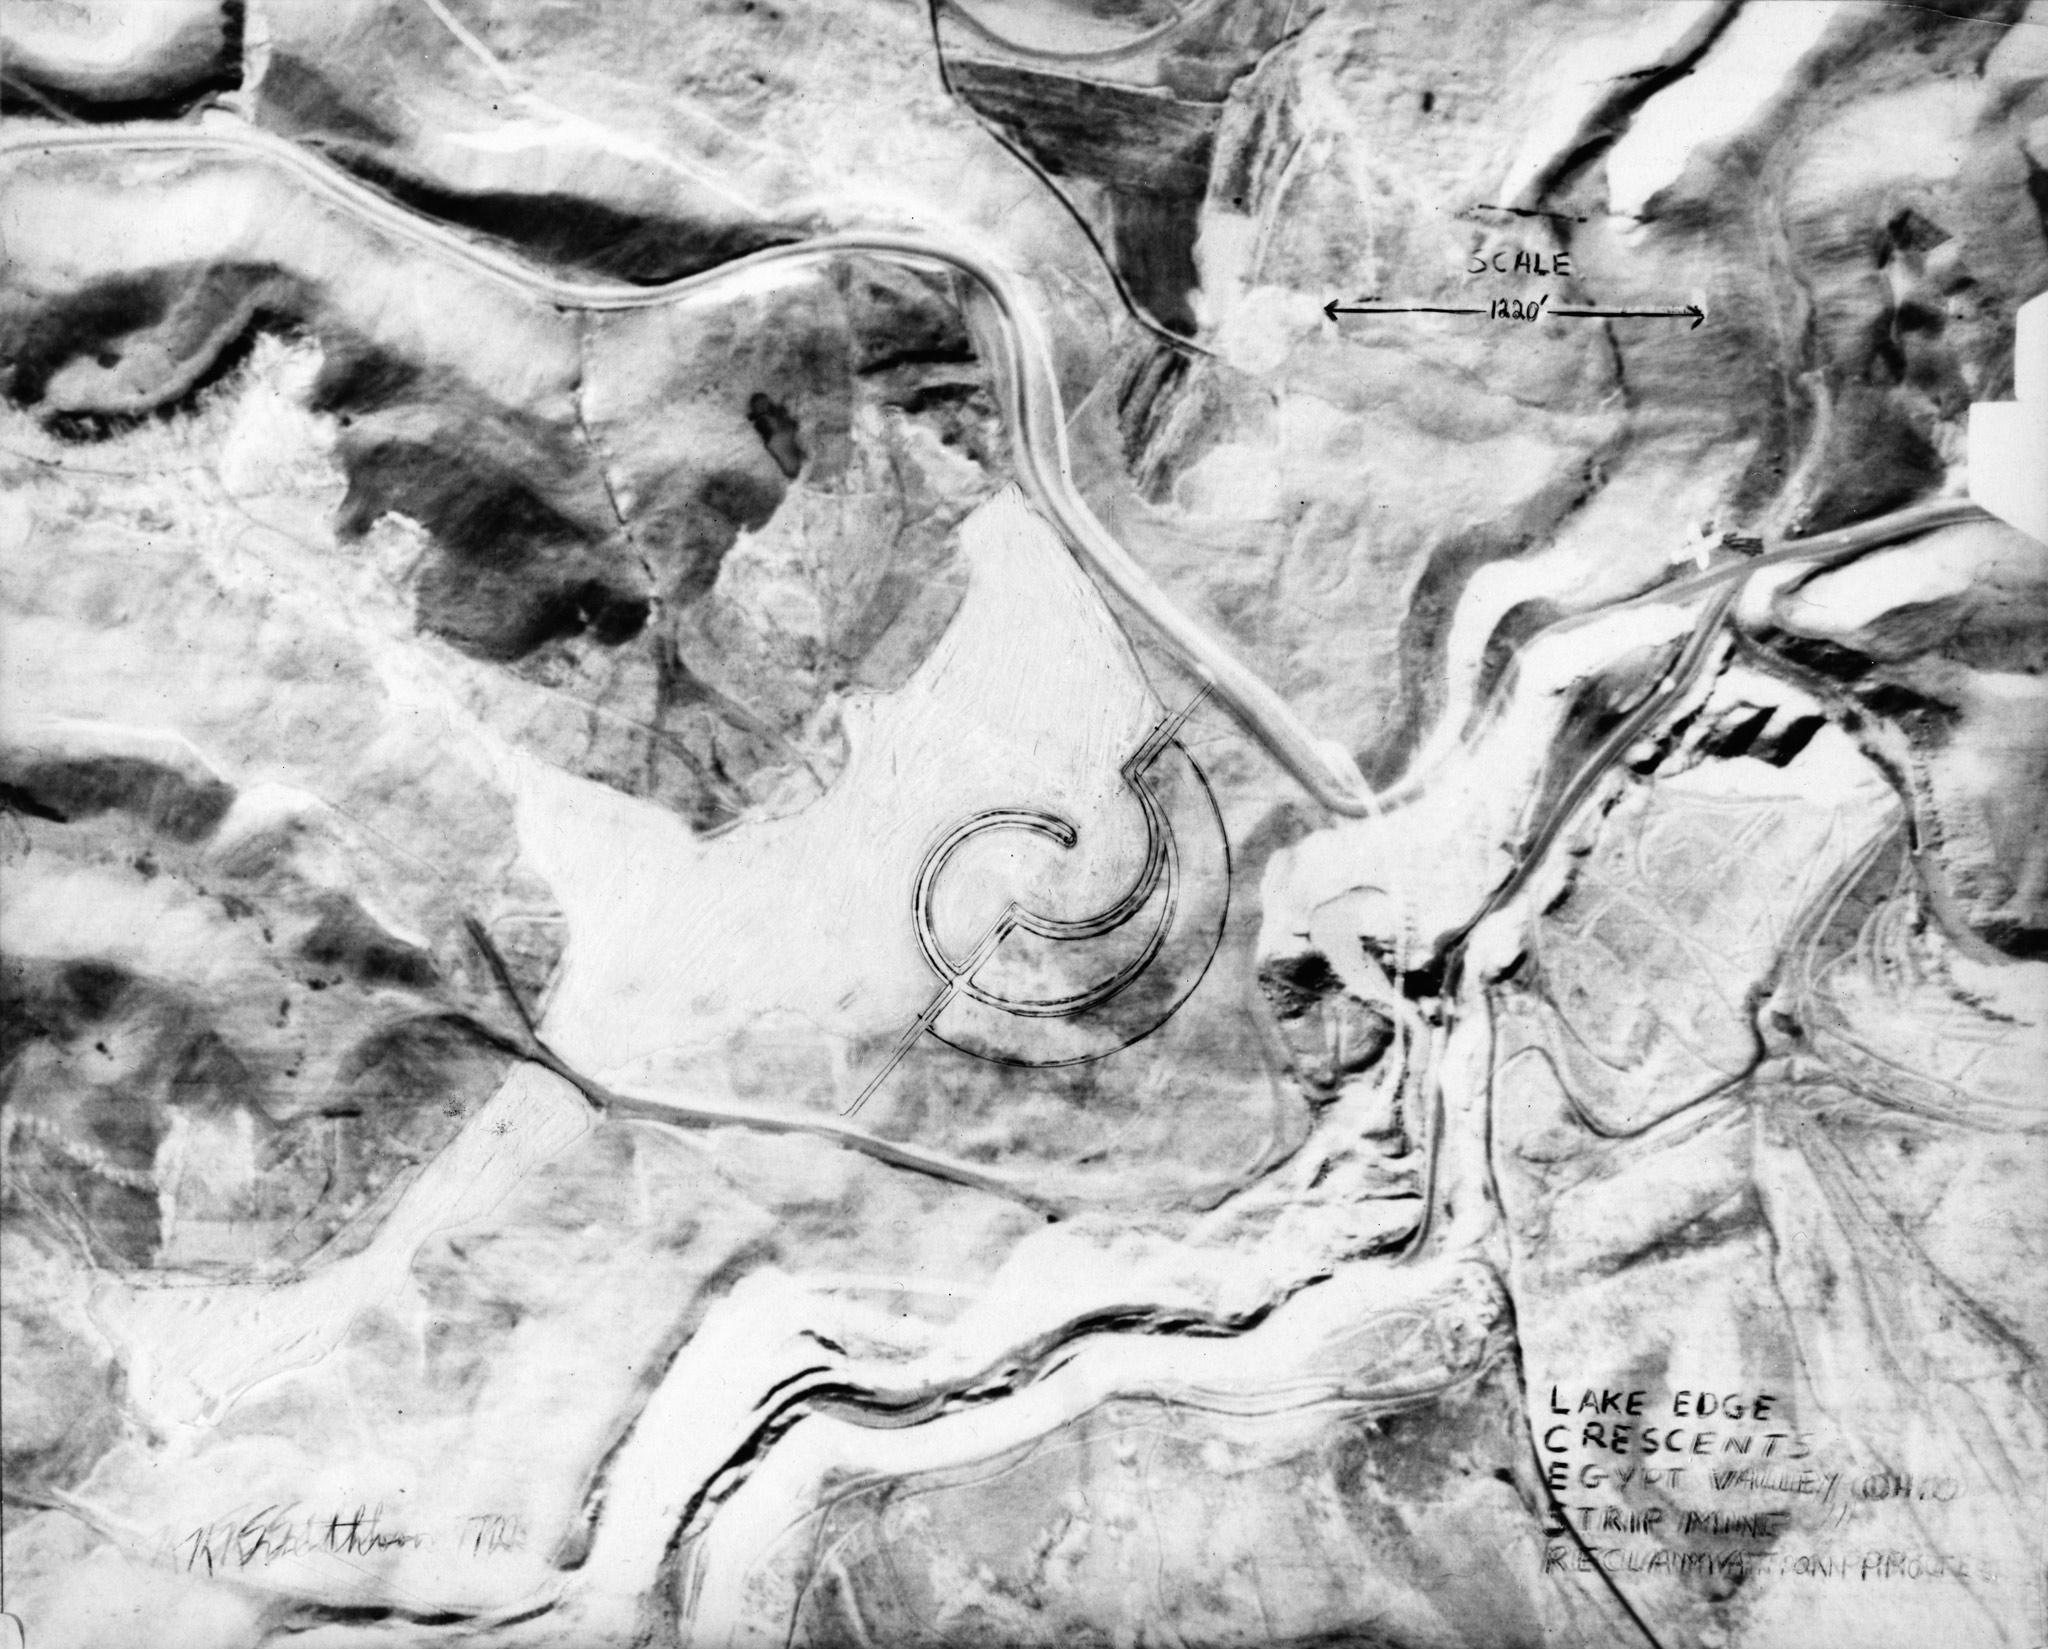 Robert Smithson's drawing of Lake Edge Crescents—Egypt Valley, Ohio—Strip Mine Reclamation Project